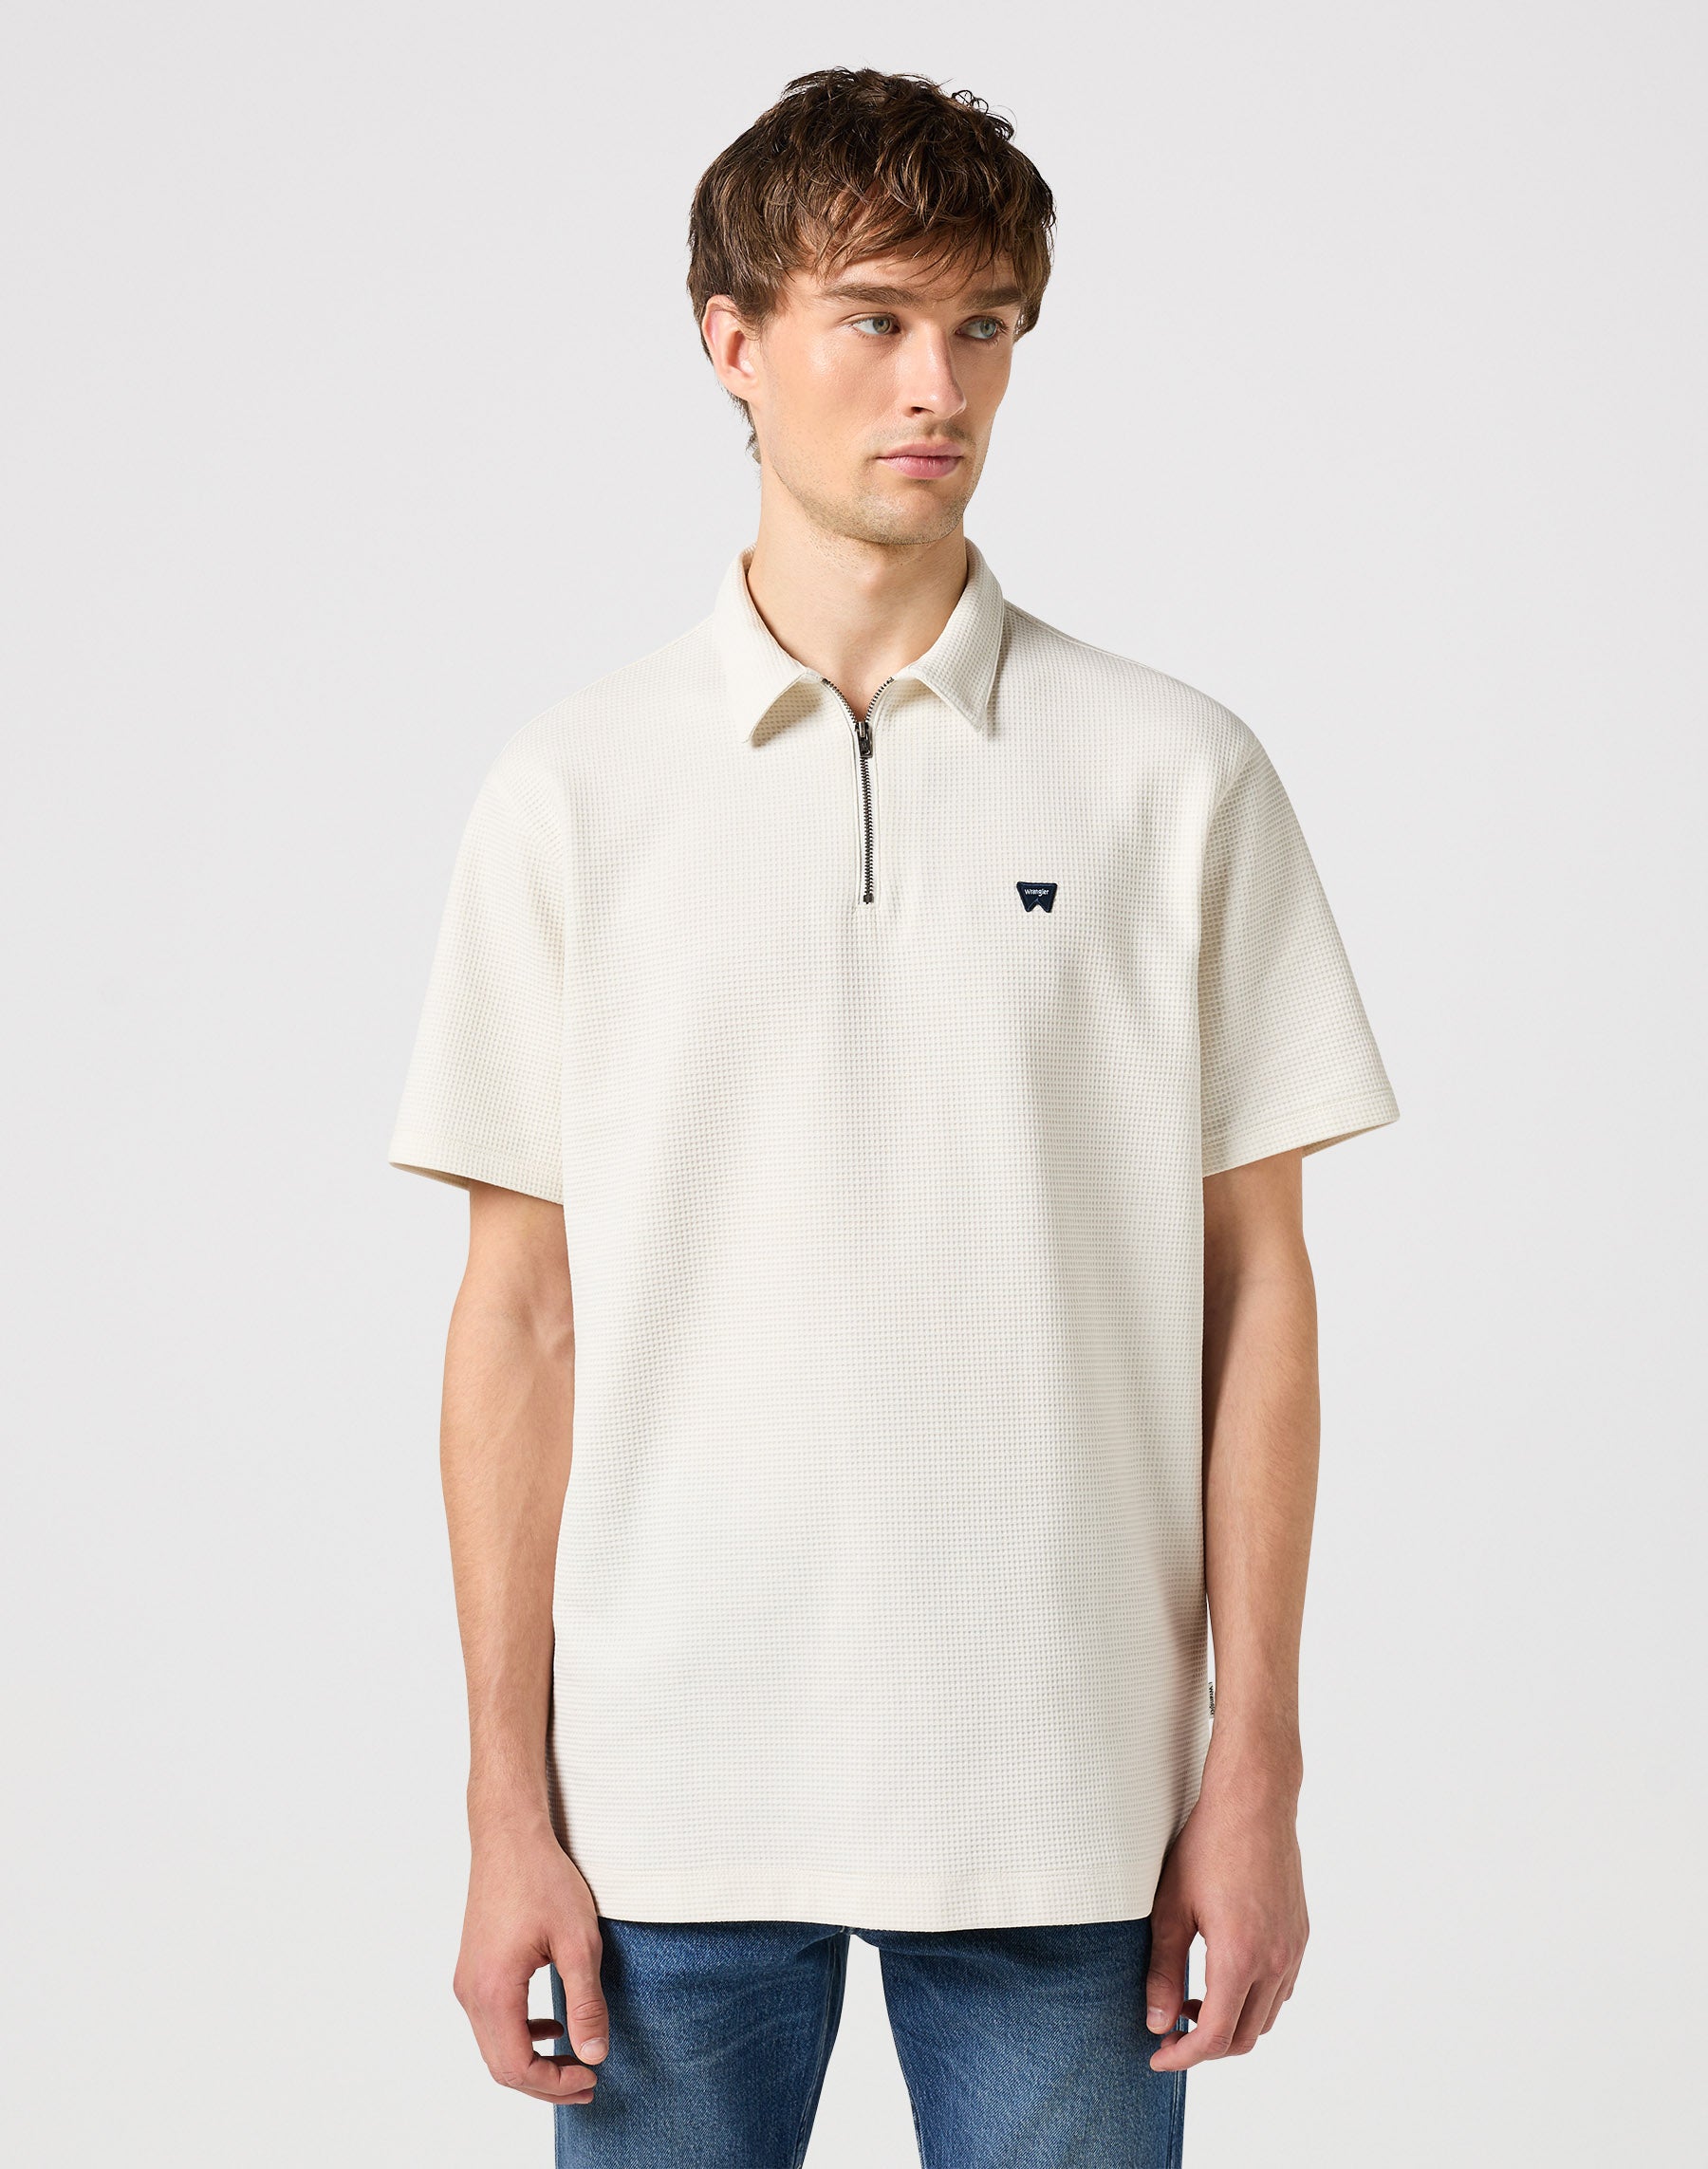 Rugby Polo Shirt in Vintage White Polos Wrangler   